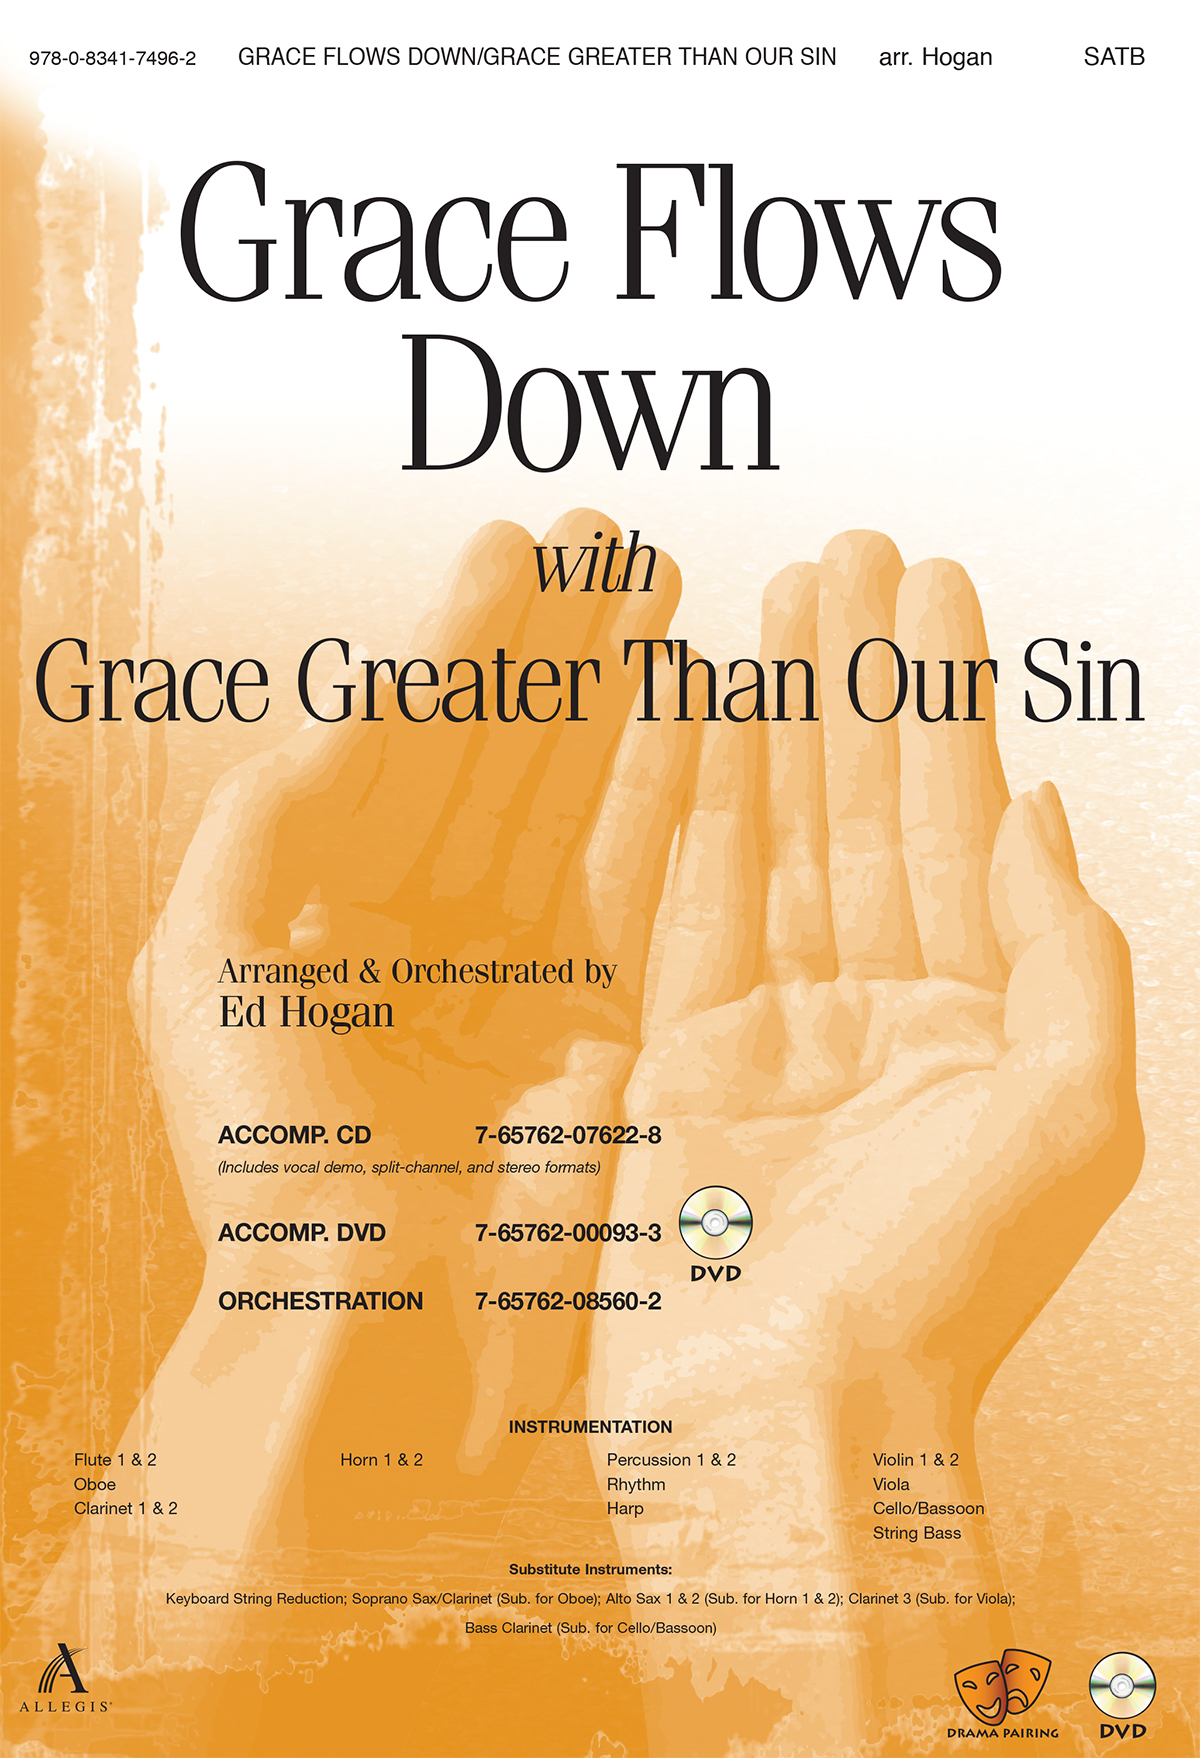 Grace Flows Down with Grace Greater than Our Sin